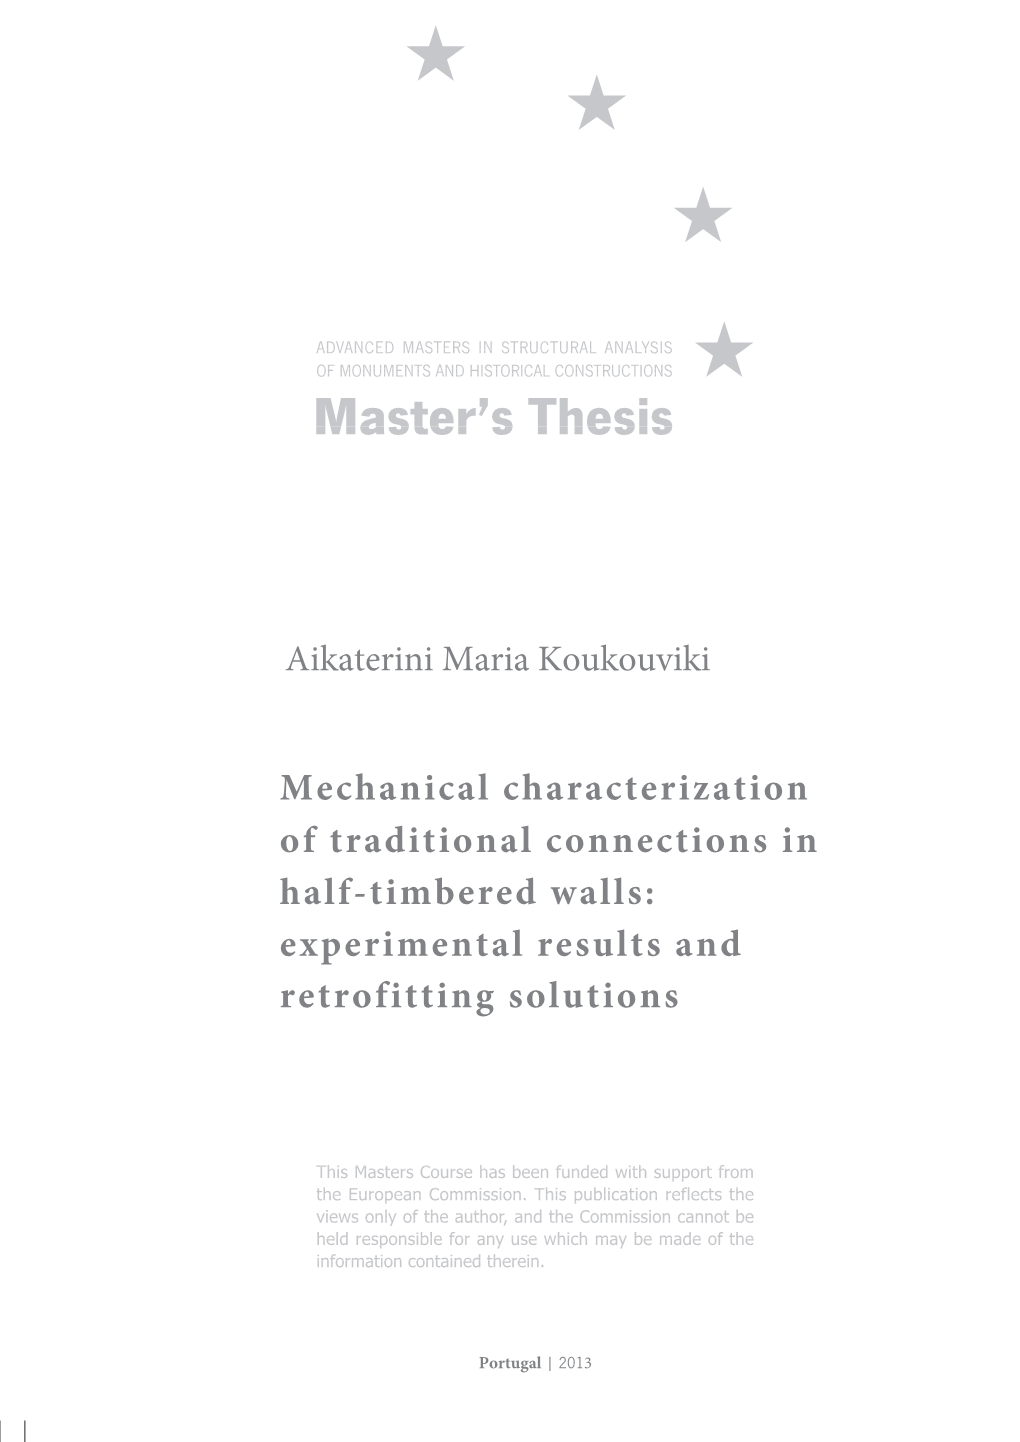 Mechanical Characterization of Traditional Connections in Half-Timbered Walls: Experimental Results and Retrofitting Solutions